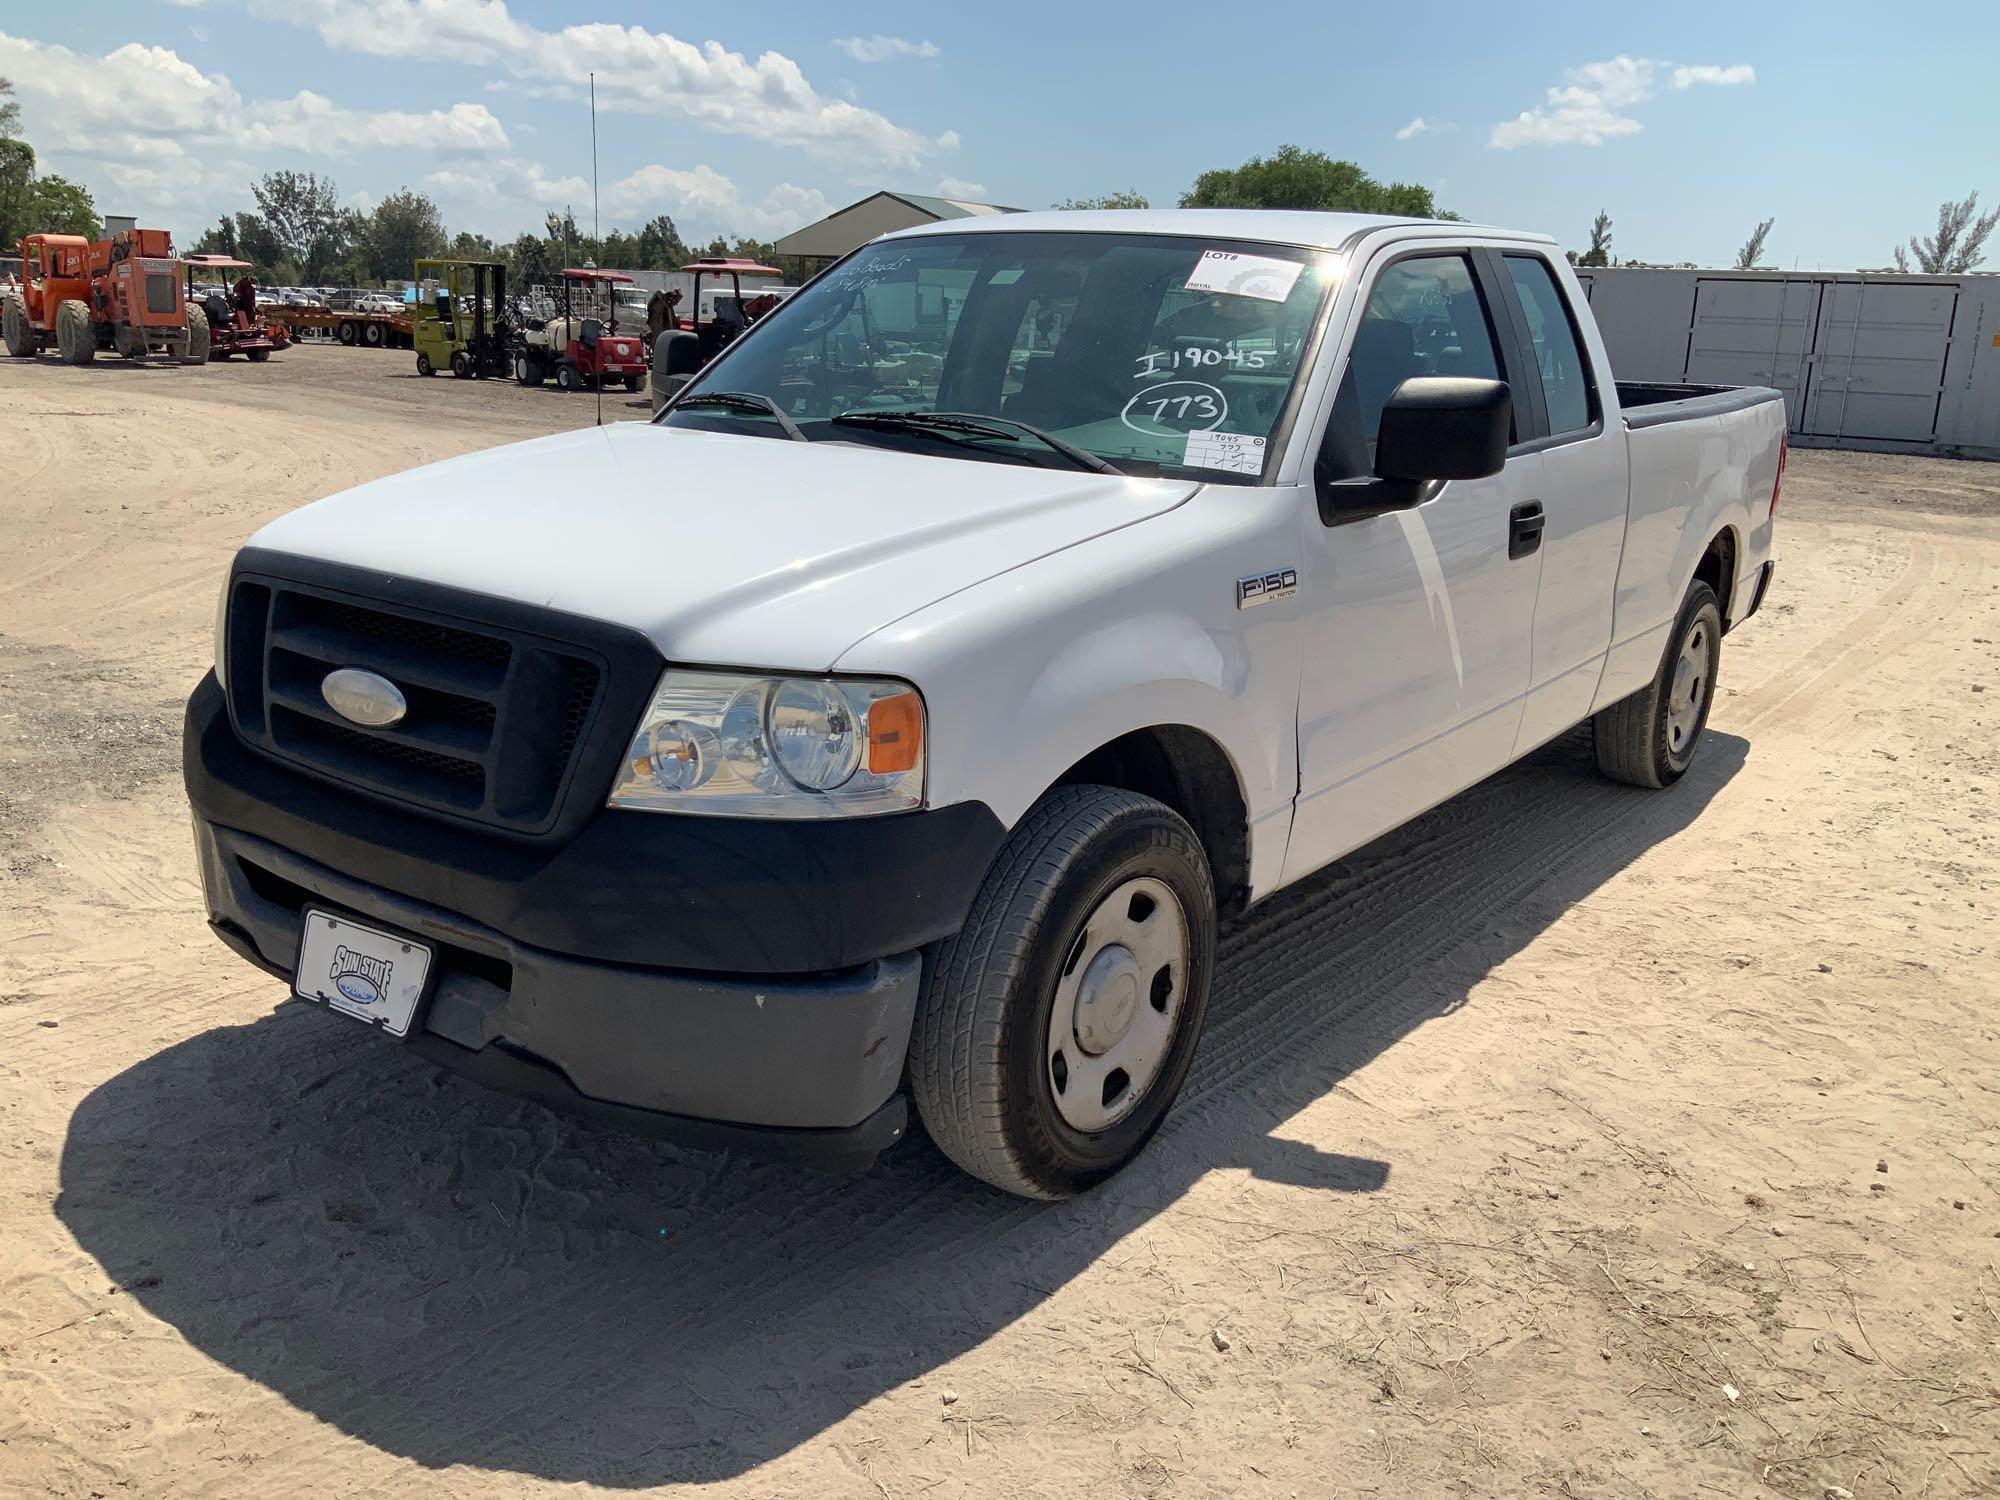 2007 Ford F-150 Ext Cab Pickup Truck